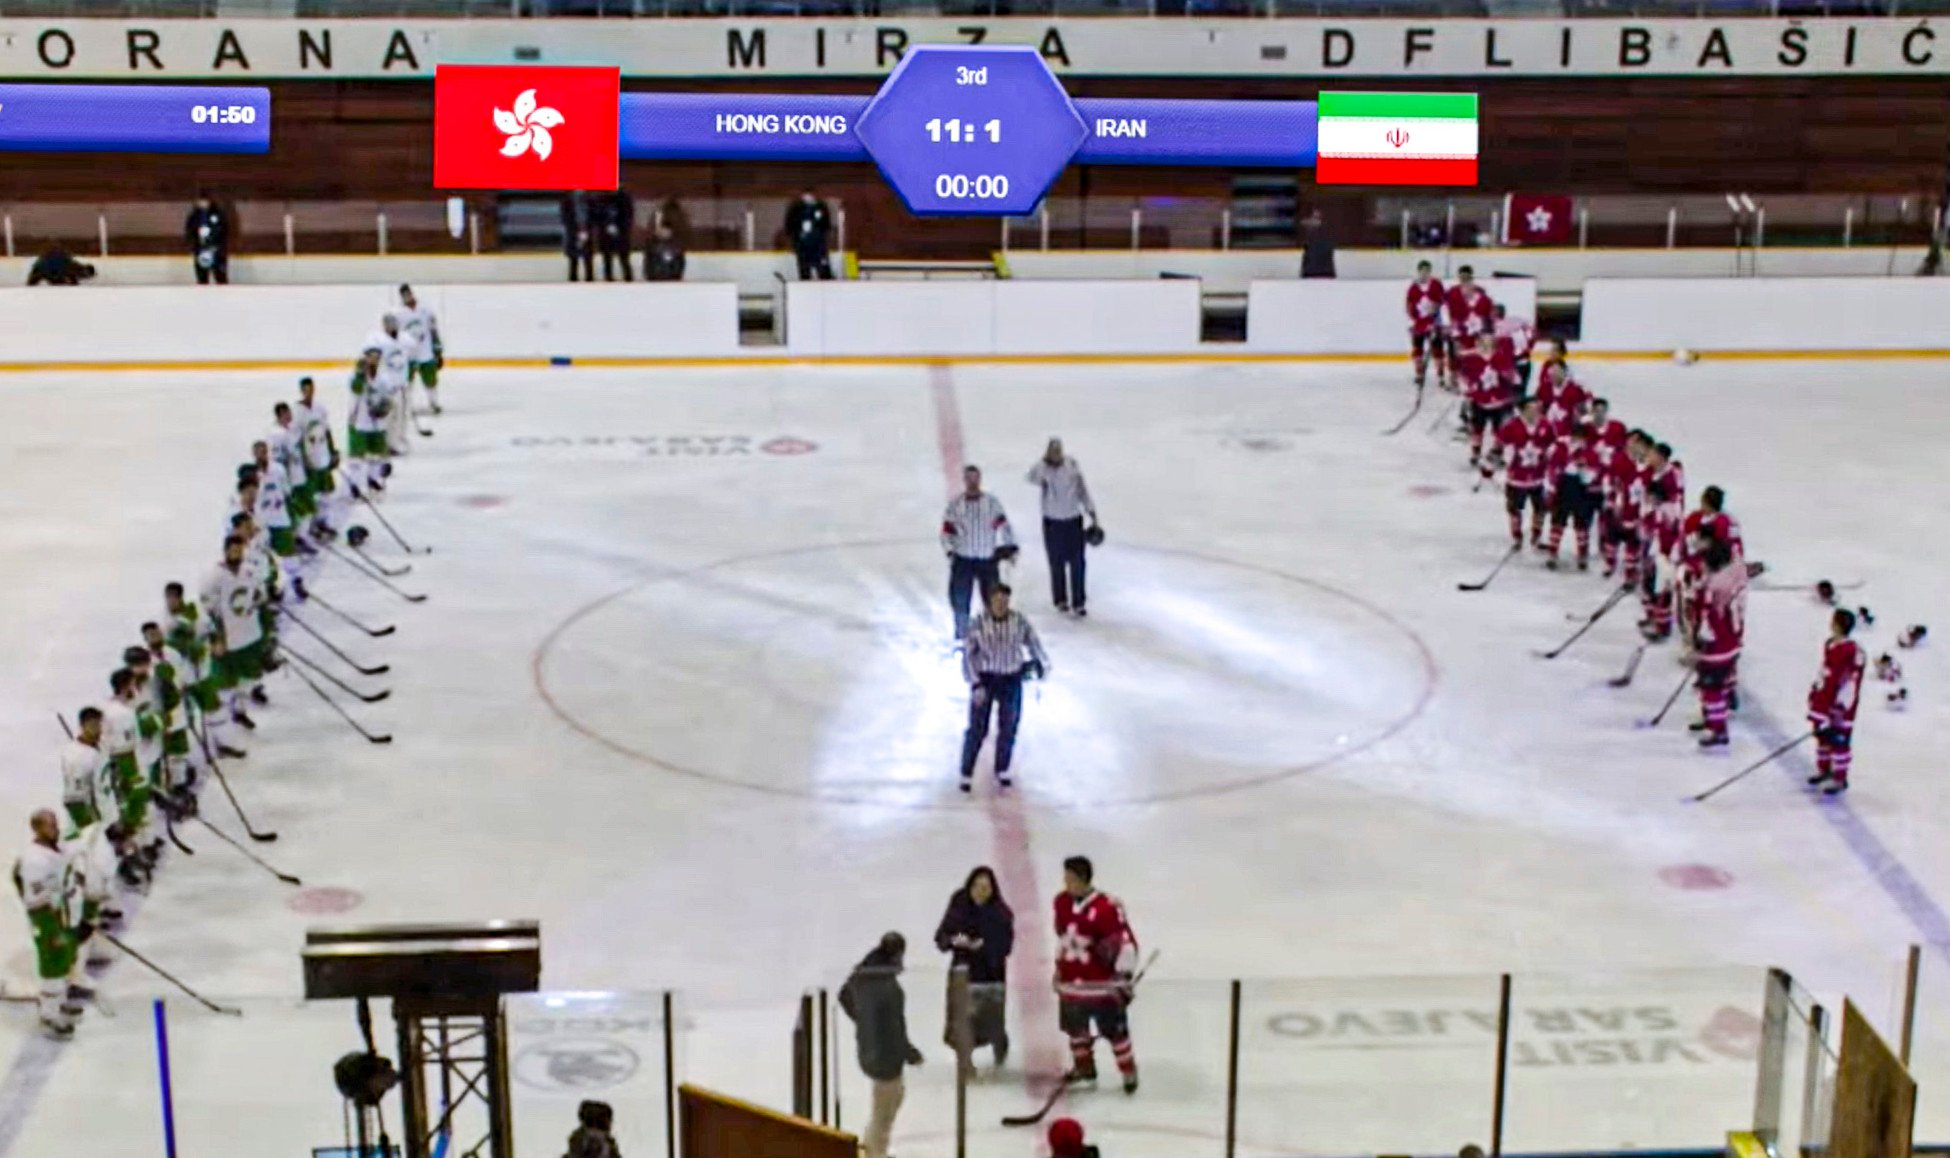 The moment the organiser of the Ice Hockey World Championship played a protest song instead of the national anthem of China after Hong Kong beat Iran. Photo: Handout